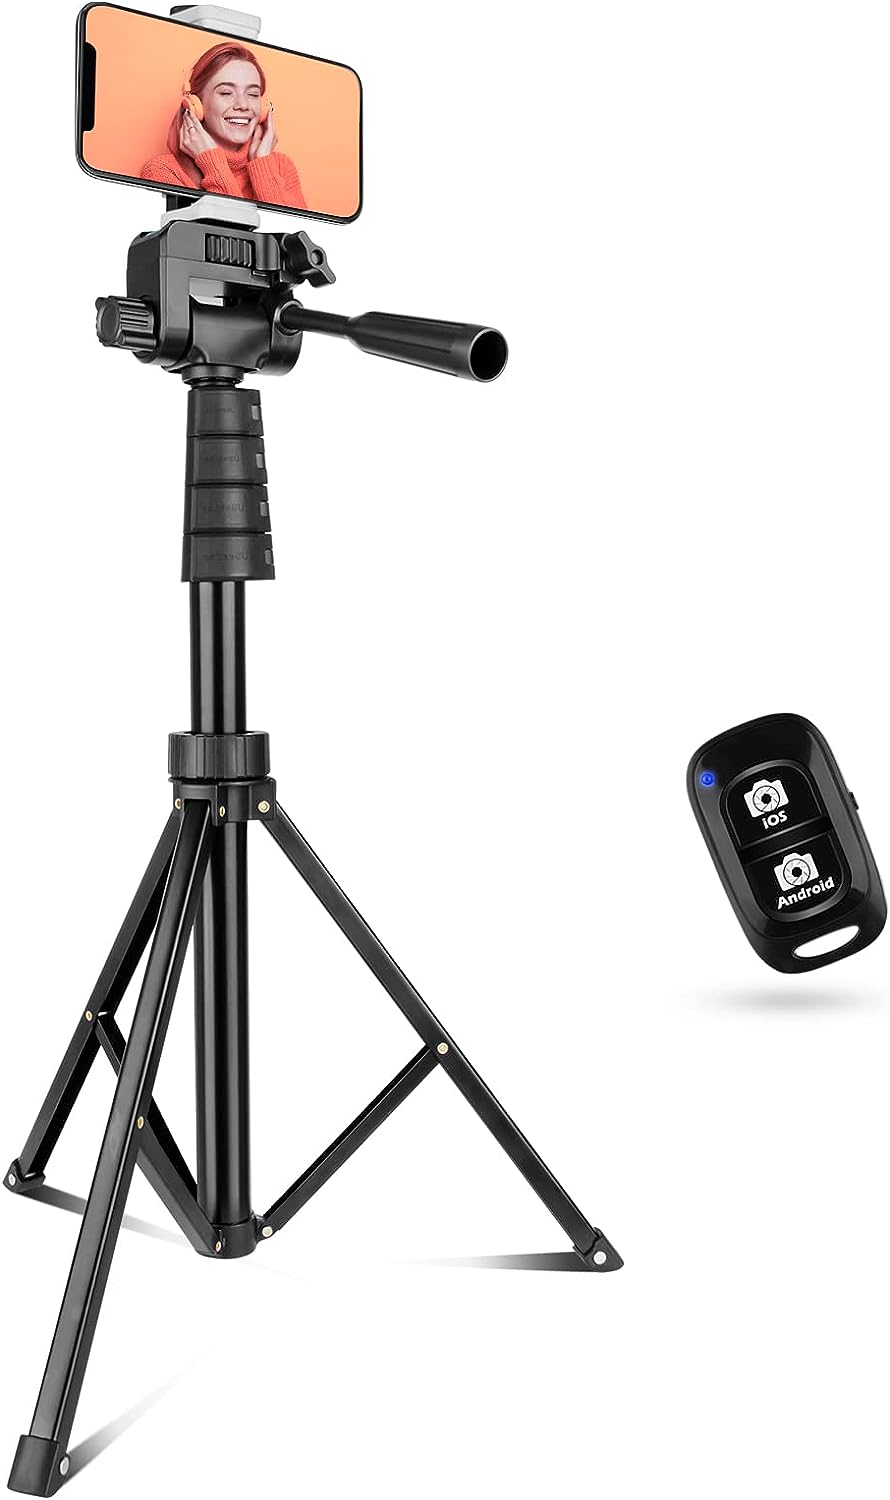 Smart Aureday 67" Phone Tripod&Camera Stand, Selfie Stick Tripod with Remote and Phone Holder, Perfect for Selfies/Video Recording/Vlogging/Live Streaming